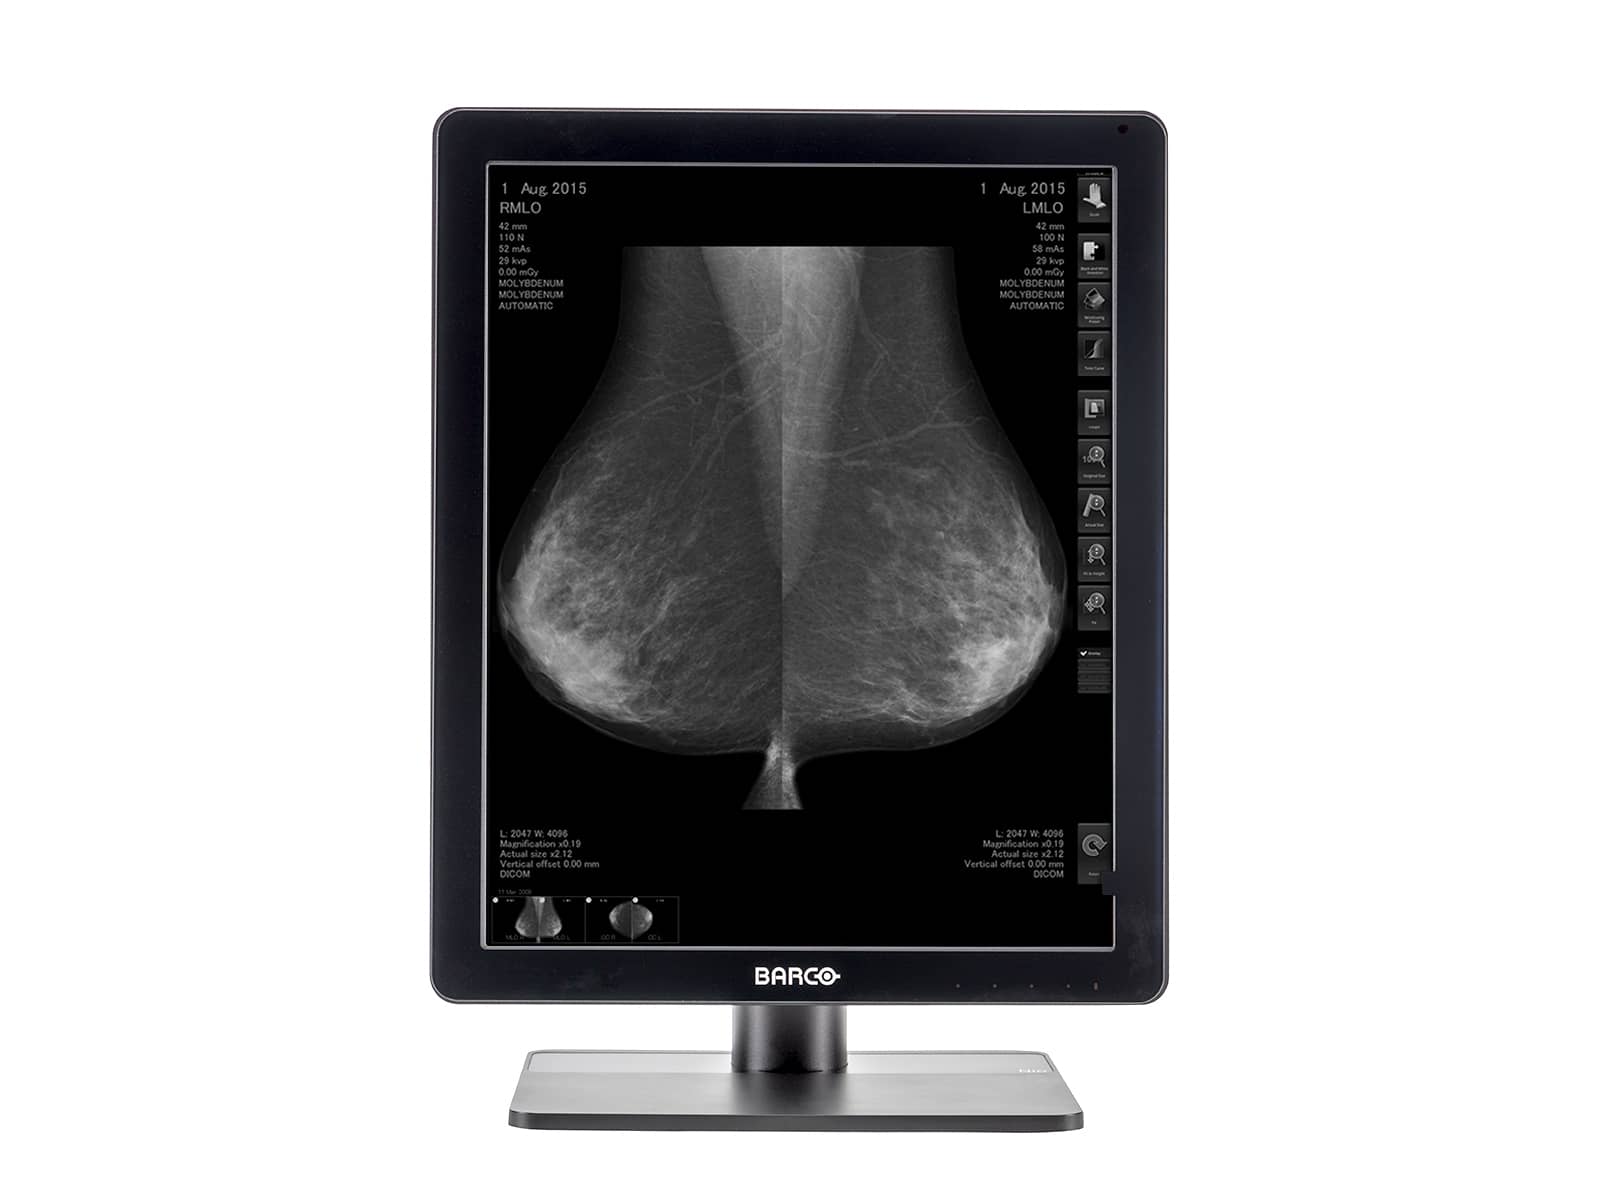 Barco Nio MDNG-5221 5MP 21" Grayscale LED 3D-DBT Mammography Breast Imaging PACS Display Monitors.com 